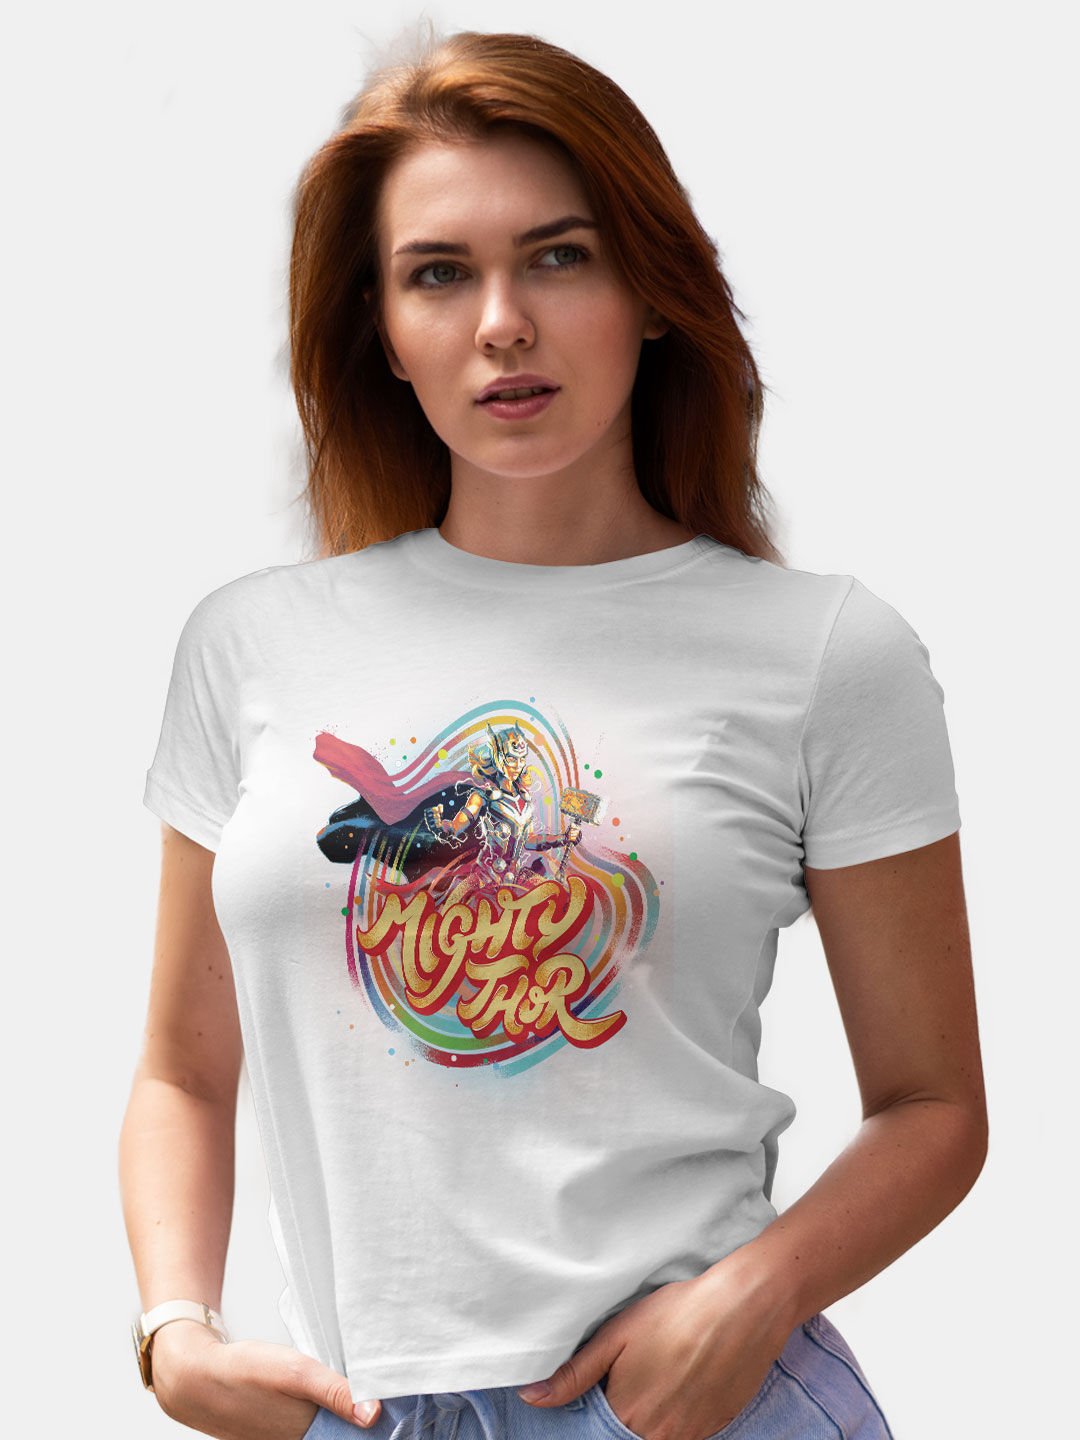 Buy Bifrost Mighty Thor - Female Designer T-Shirts T-Shirts Online